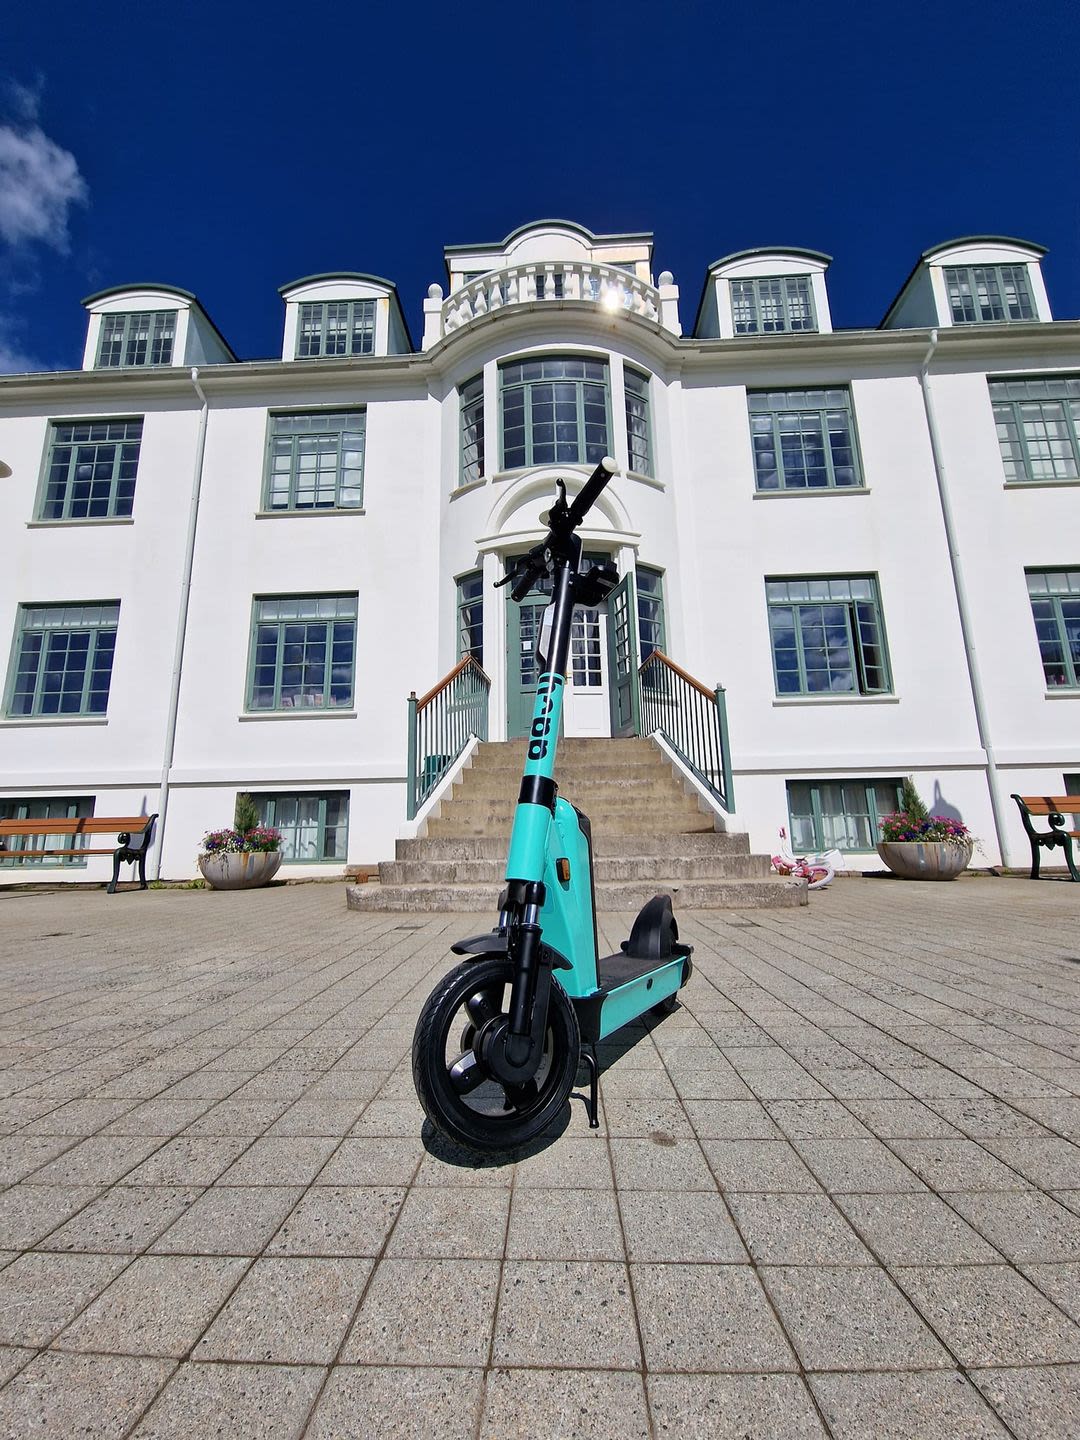 Located in the magnificent Westfjords region of Iceland. Launched with 50 eco-friendly scooters are now in available to residents and guests for traveling around Ísafjörður.